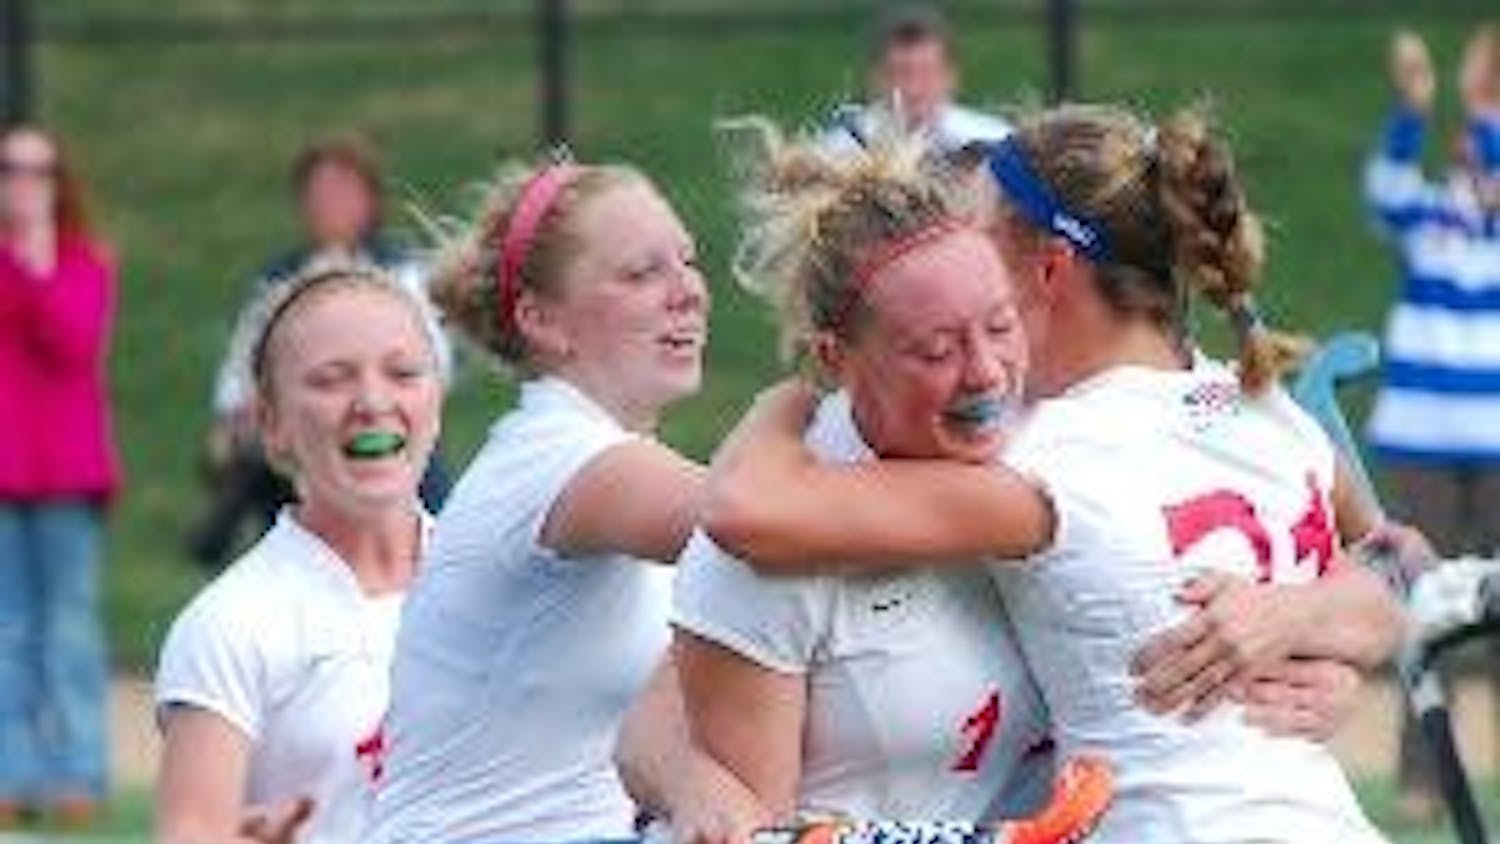 ON TOP - Members of the AU women's field hockey team celebrates their victory over Bucknell on Sunday to clinch their sixth-consecutive Patriot League title. The victory sends the team to the NCAA Play-In Game at home on Tuesday afternoon against Northeas